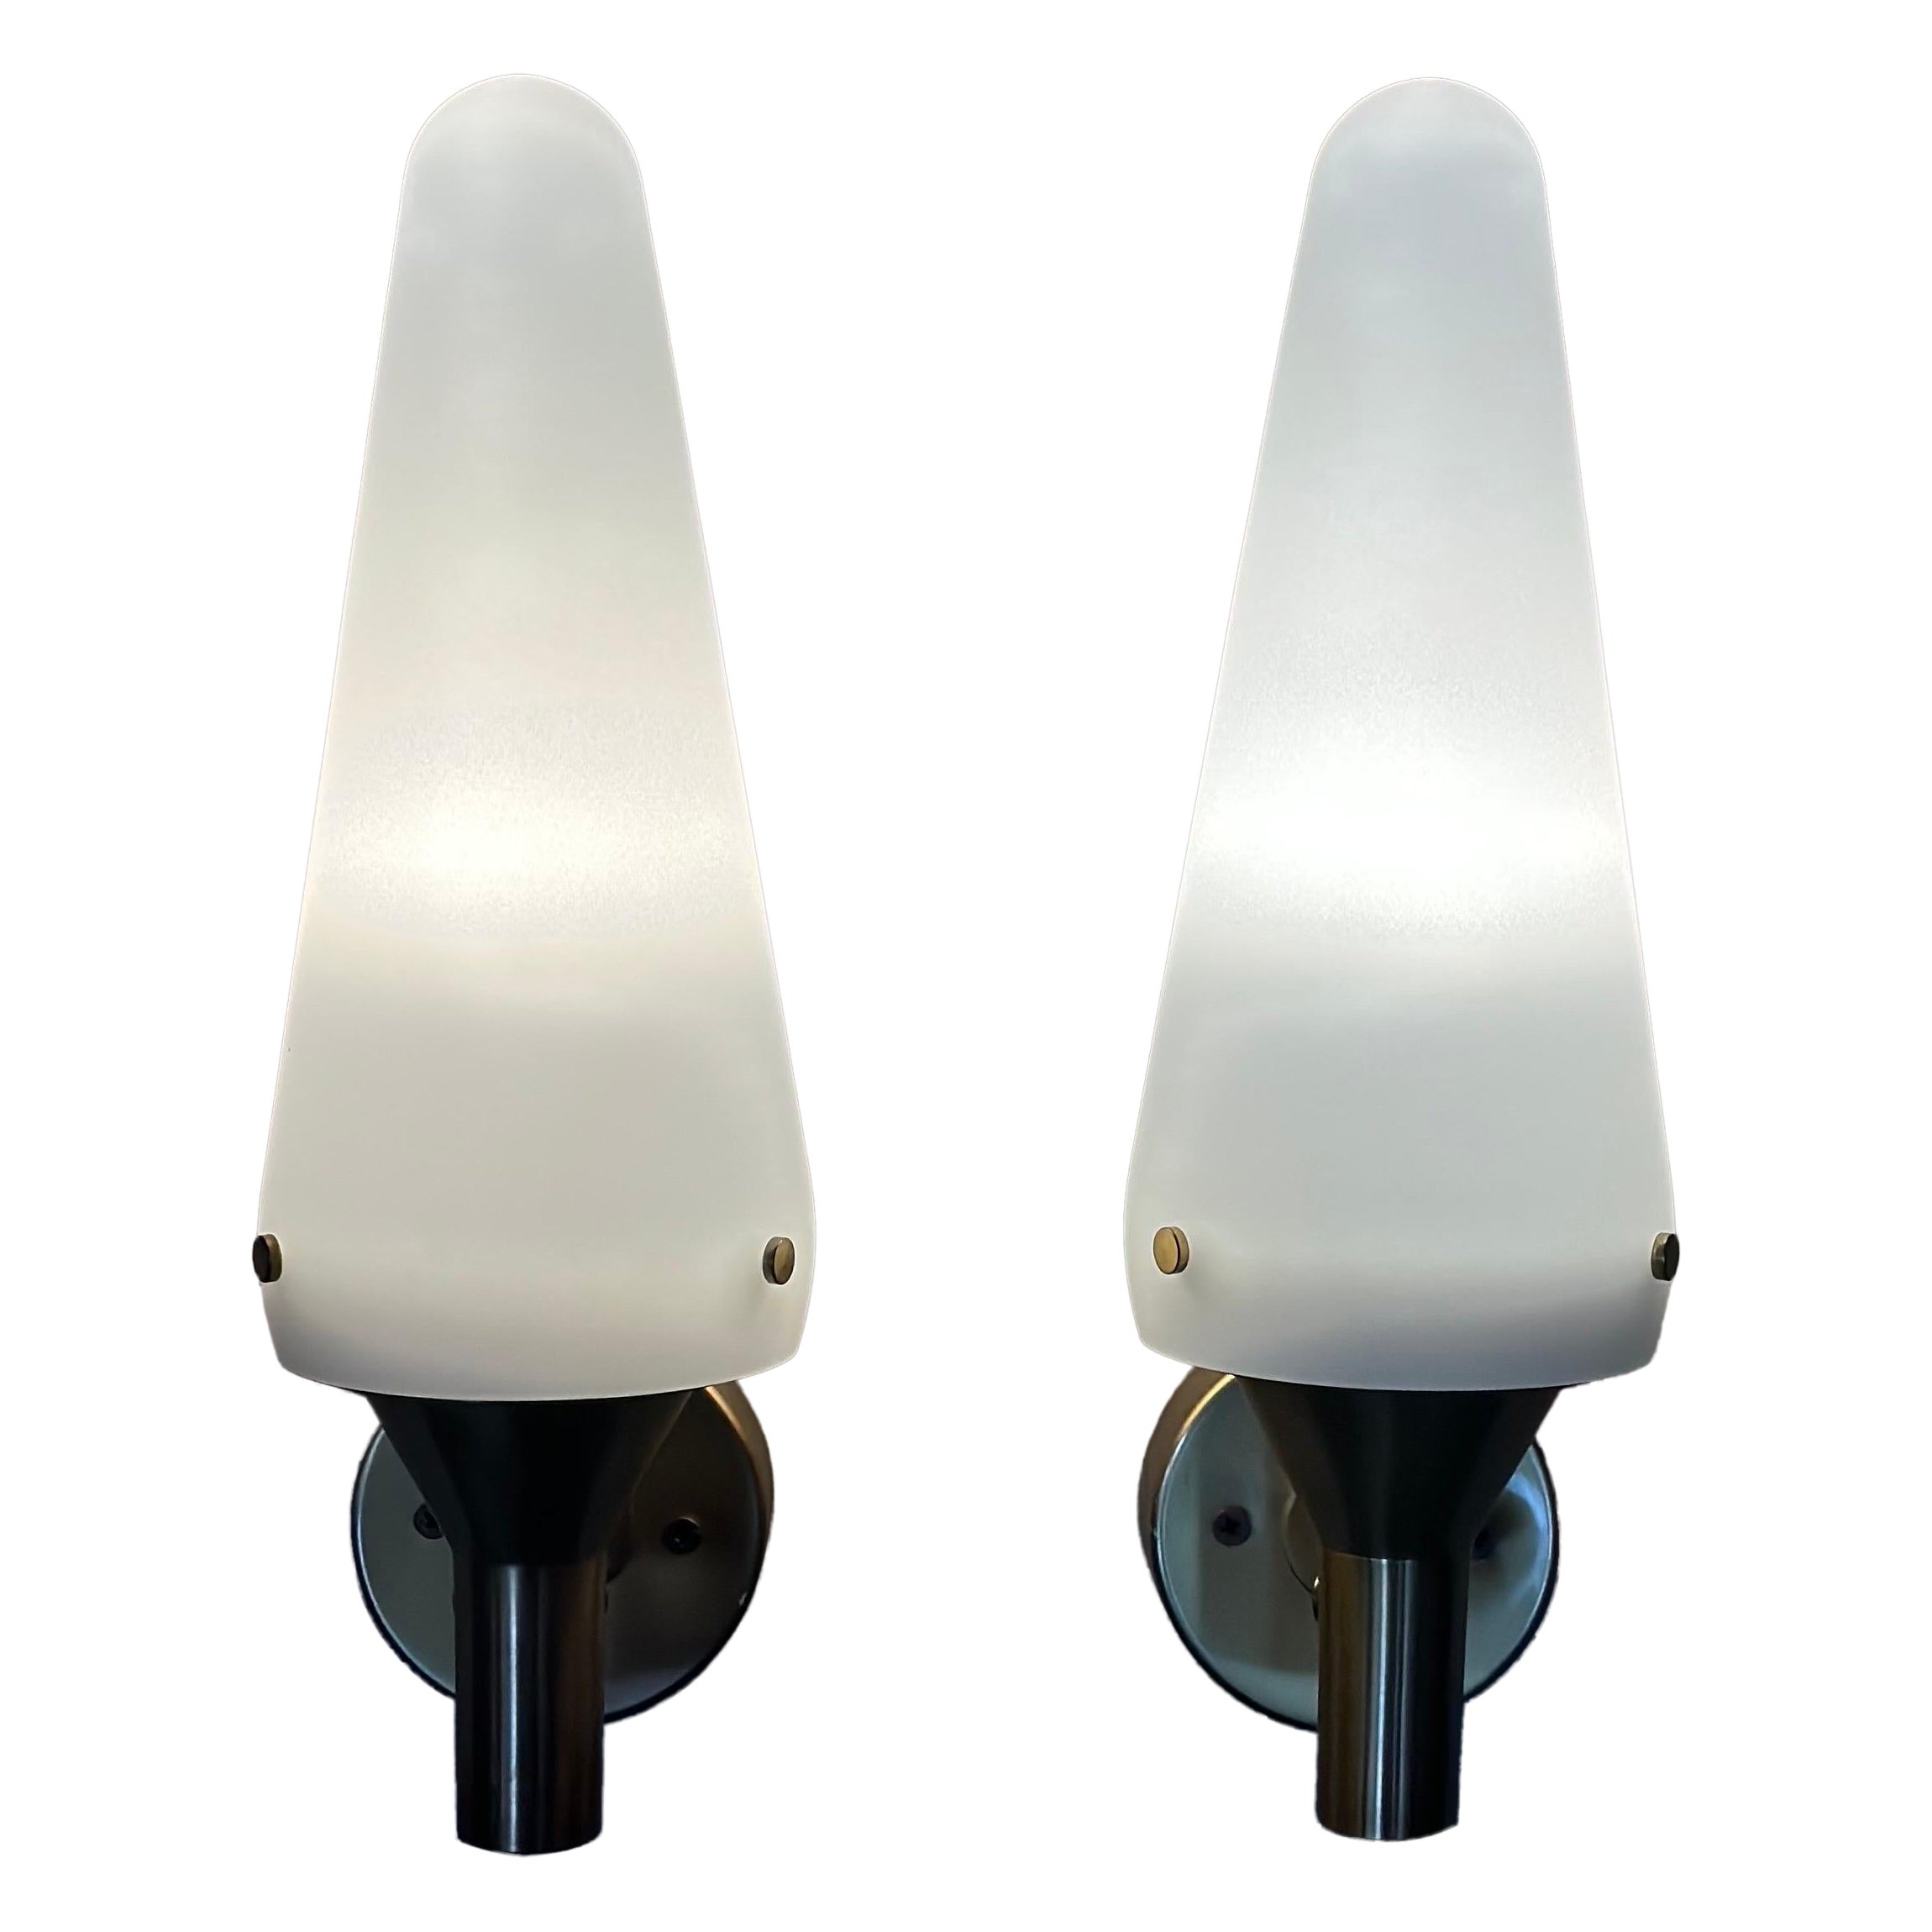 Pair of "1670" Hans-Agne Jakobsson Wall Lamps, Markaryd (Sweden), 1950s For Sale